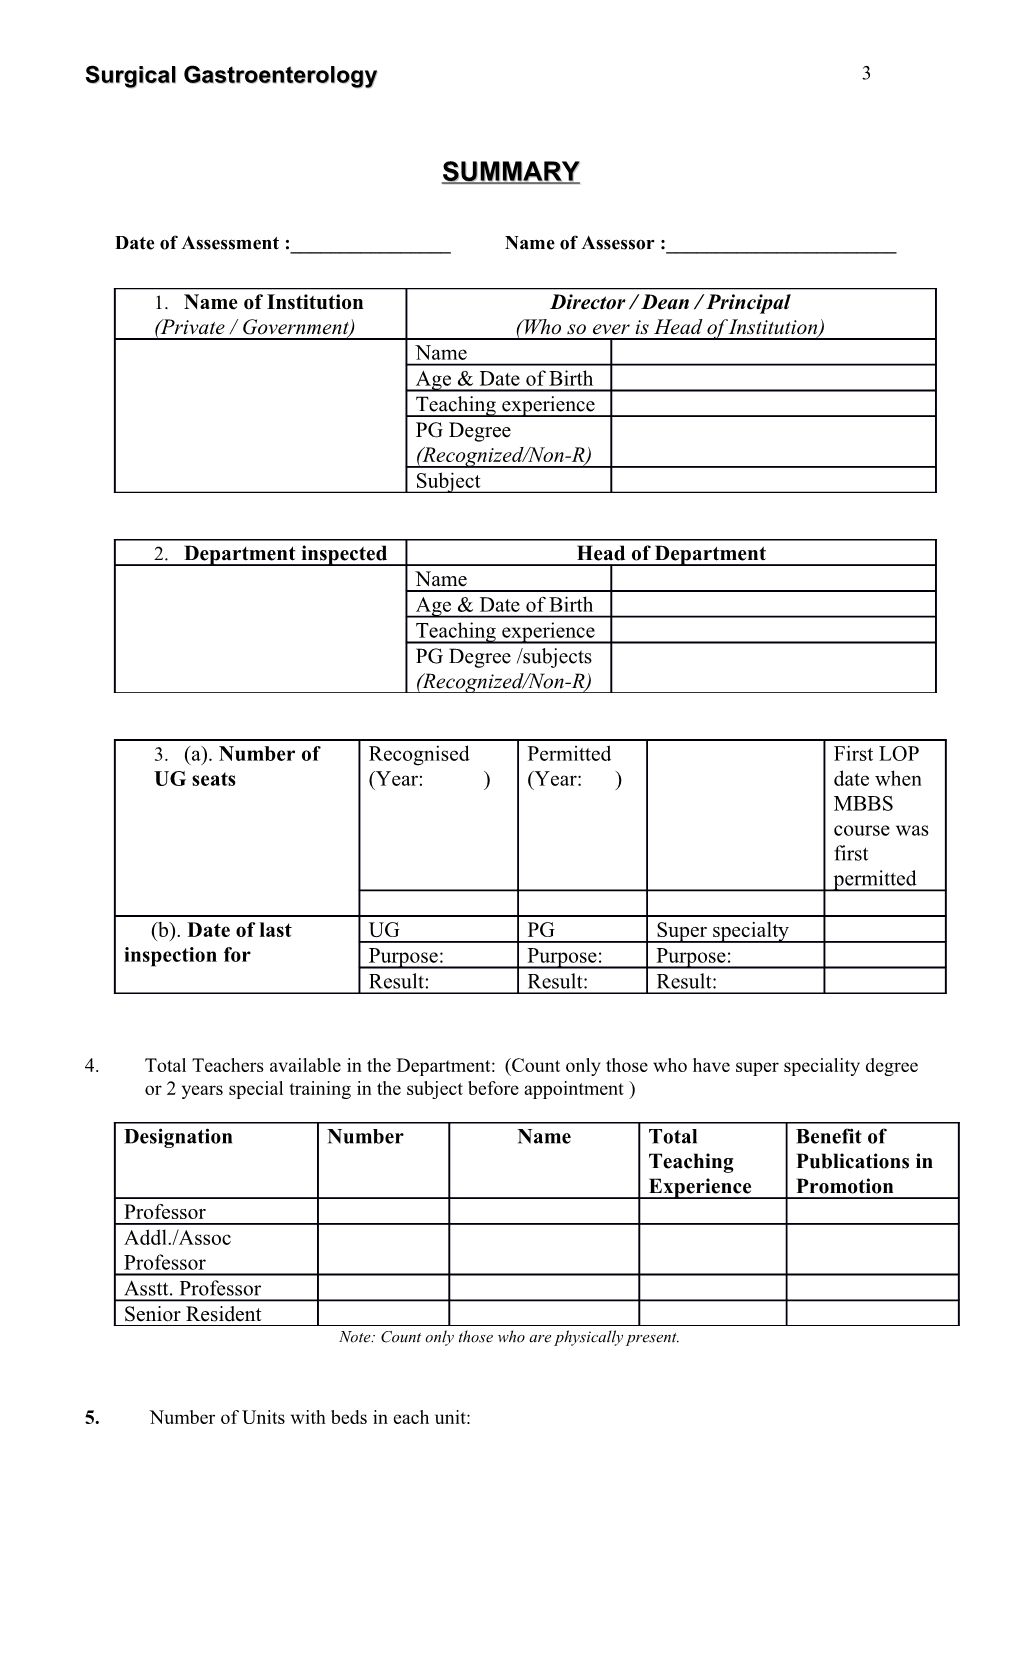 Standard Assessment Form for Pg Coursesyear 2019-20